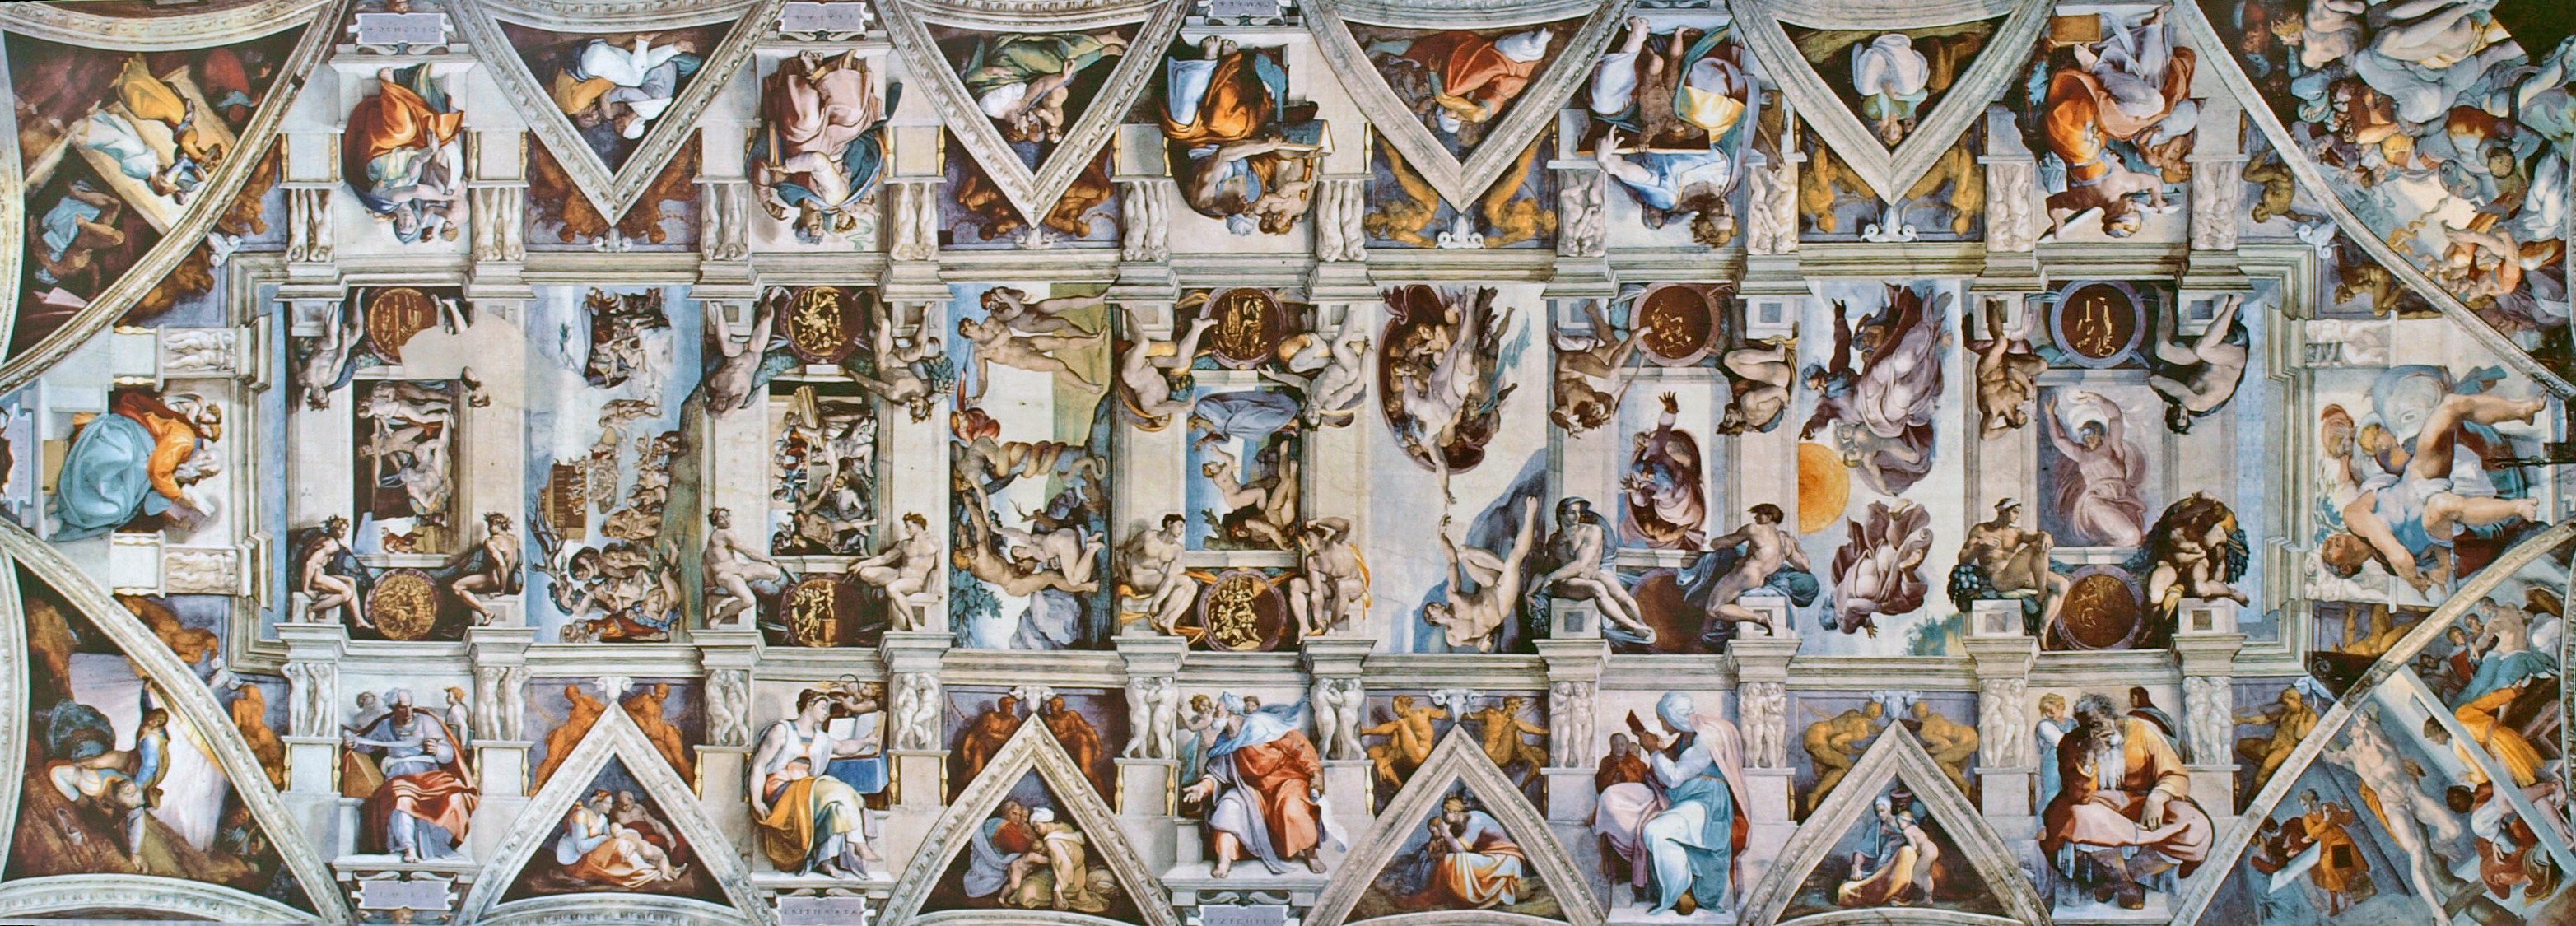 A Detail You May Not Have Noticed in Michelangelo's Sistine Chapel Fresco -  Atlas Obscura